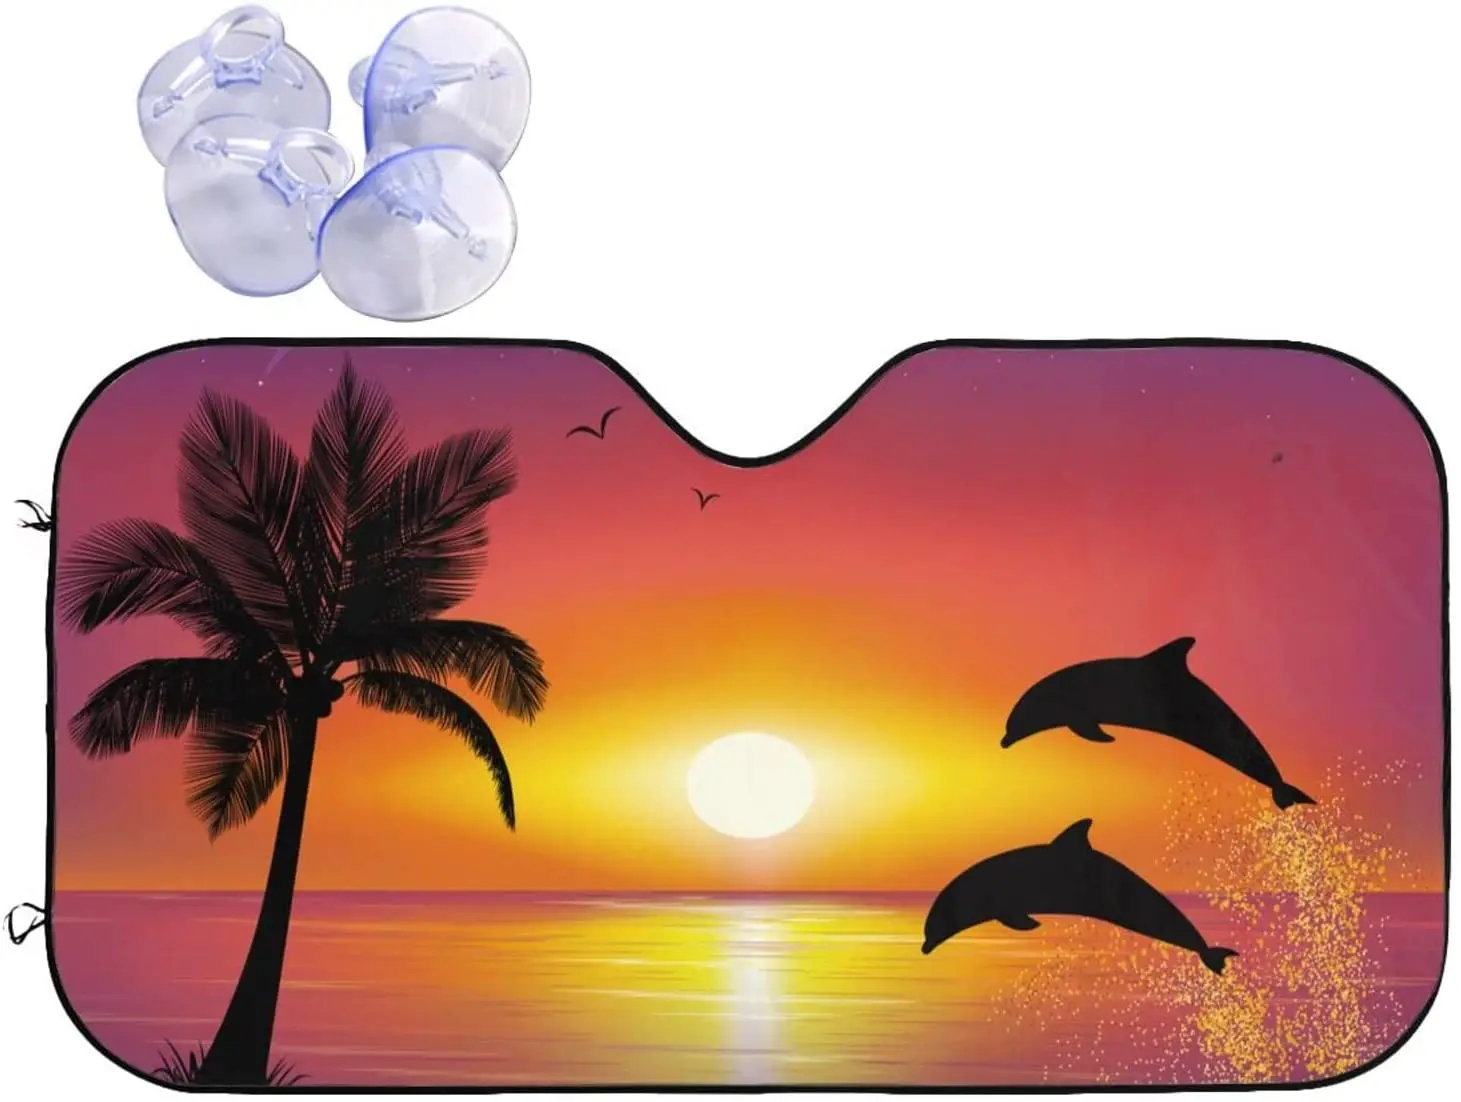 

Tropical Beach Sunset Fish Car Windshield Sunshade Front Window Sun Visor Protector Foldable Shield Cover for Truck SUV